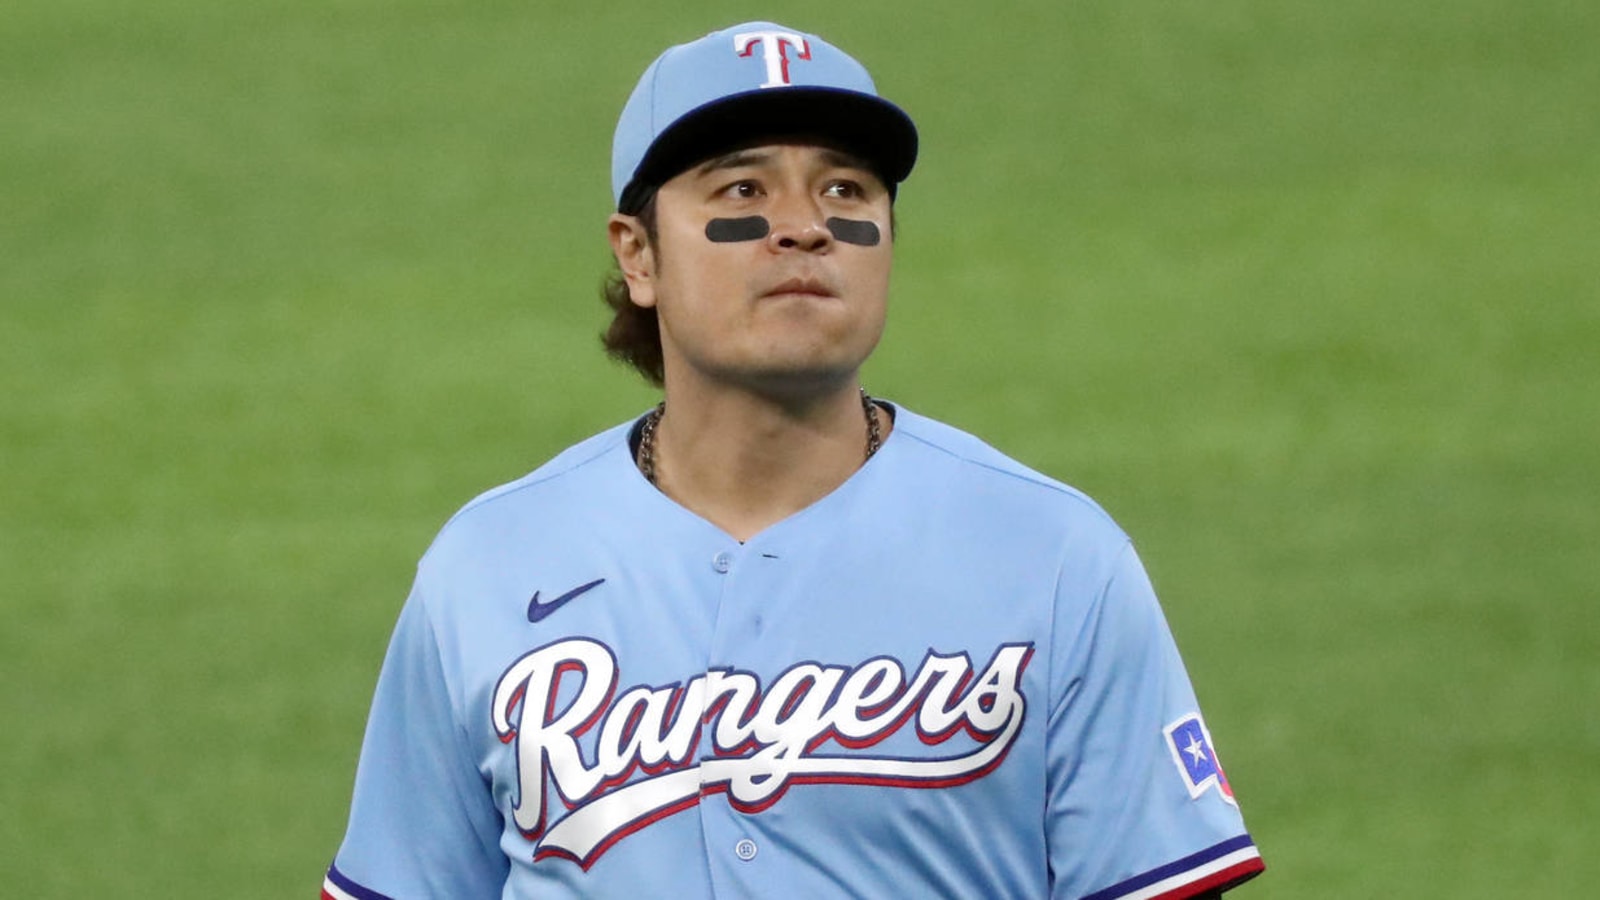 Report: Brewers interested in Shin-Soo Choo at 1B